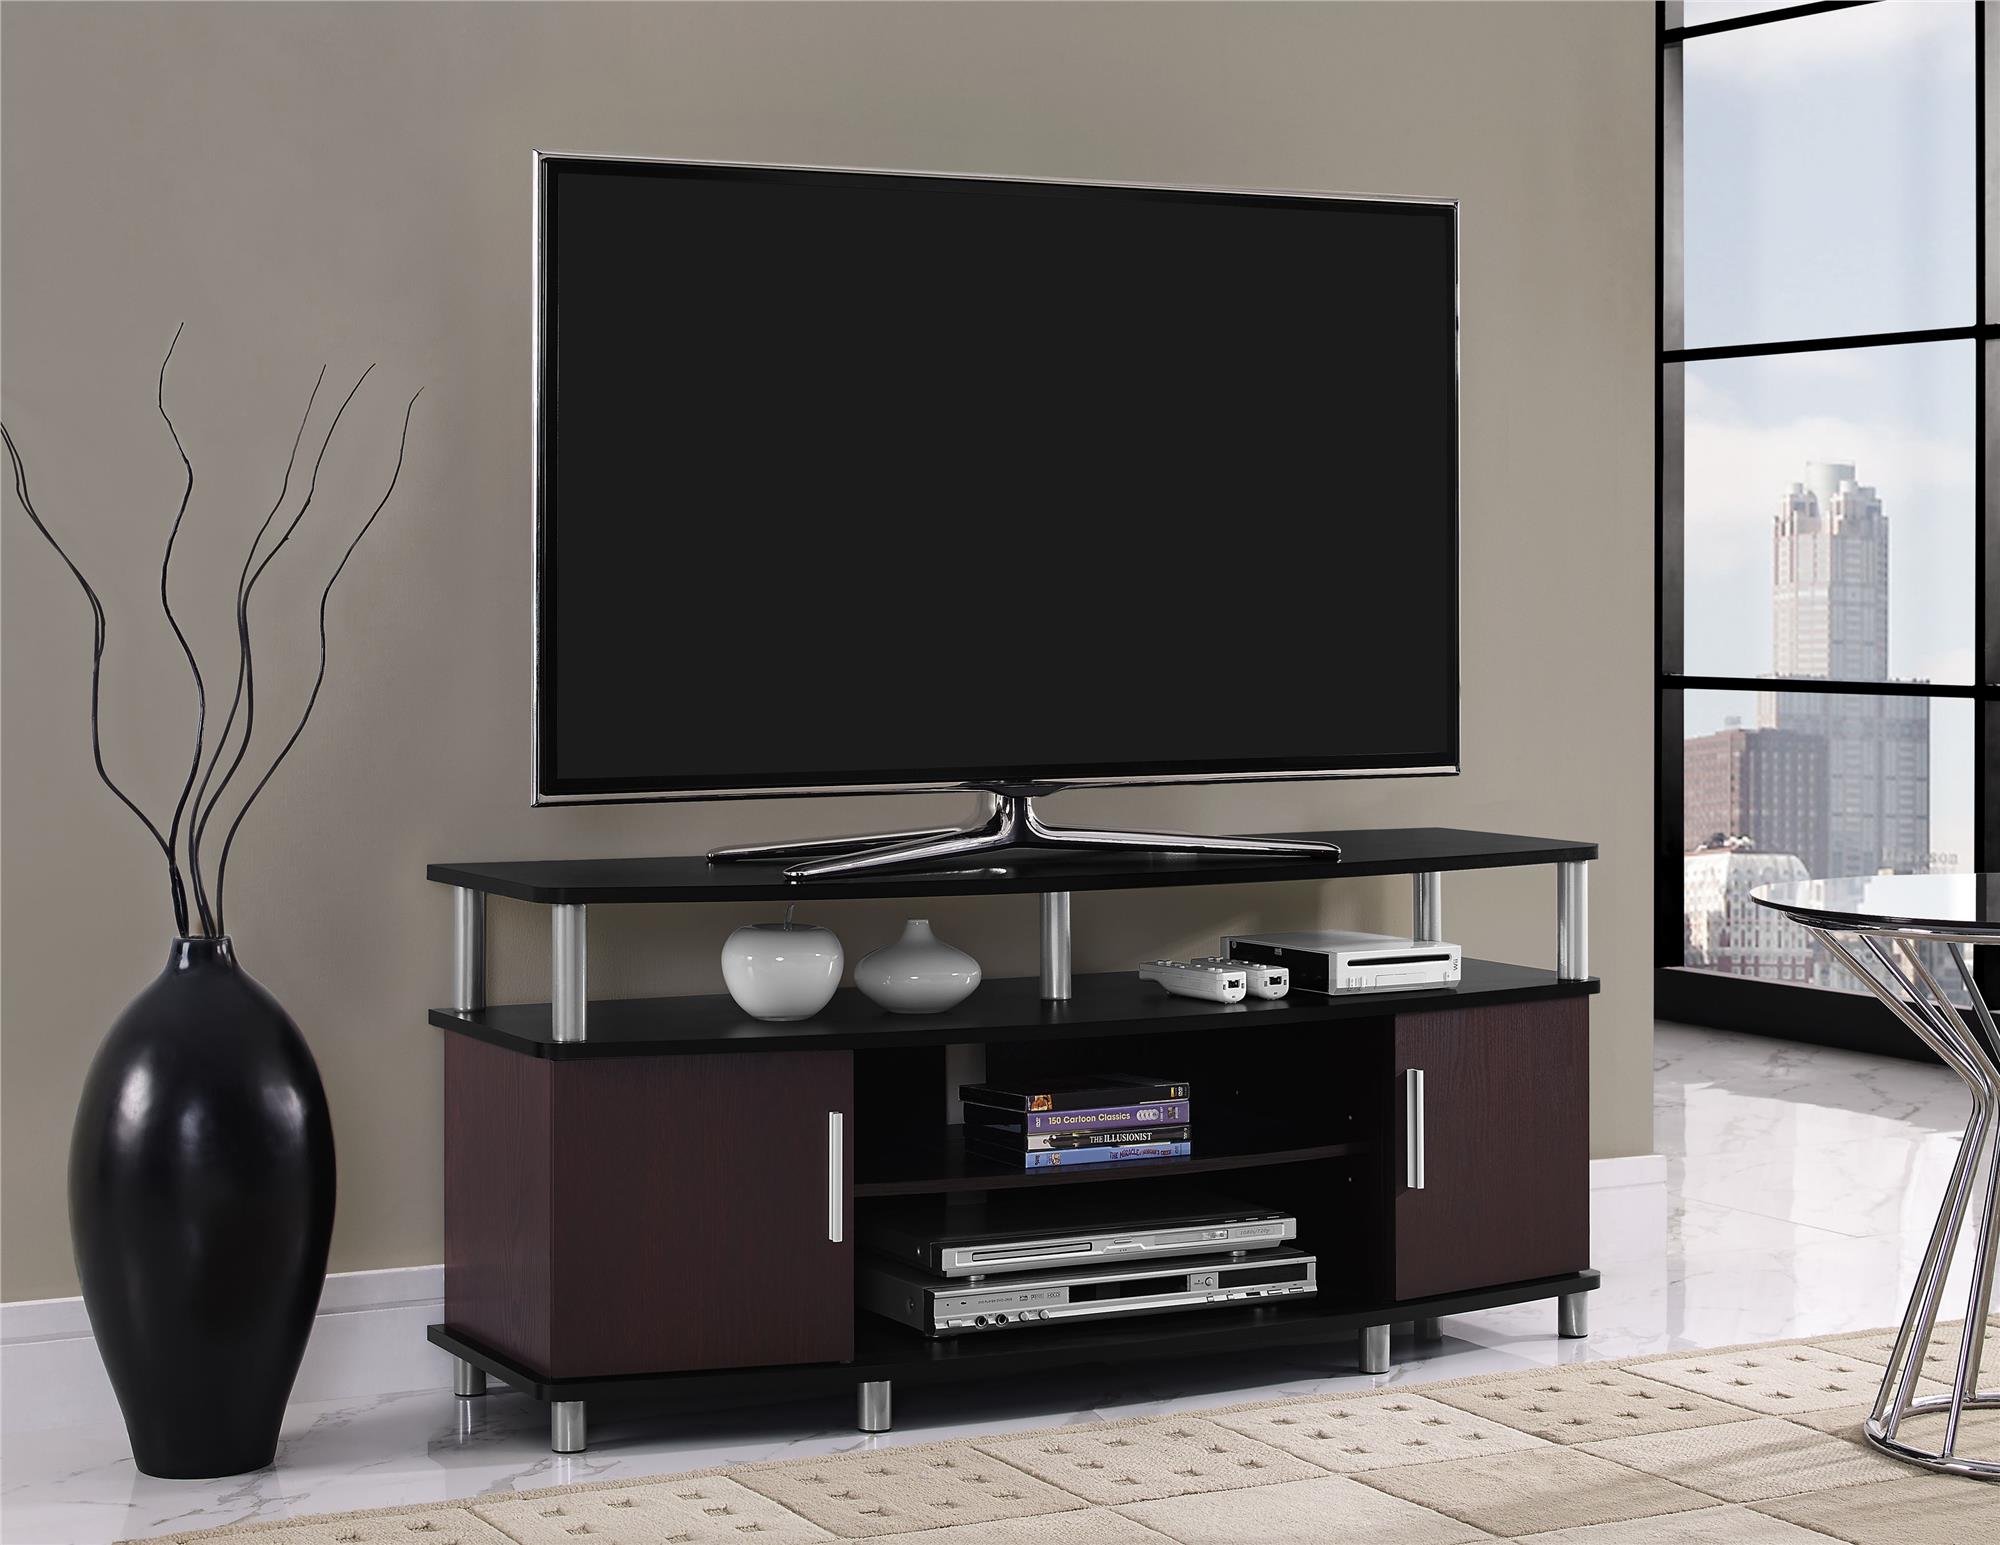 Carson TV Stand for TVs up to 50", Cherry - image 1 of 12